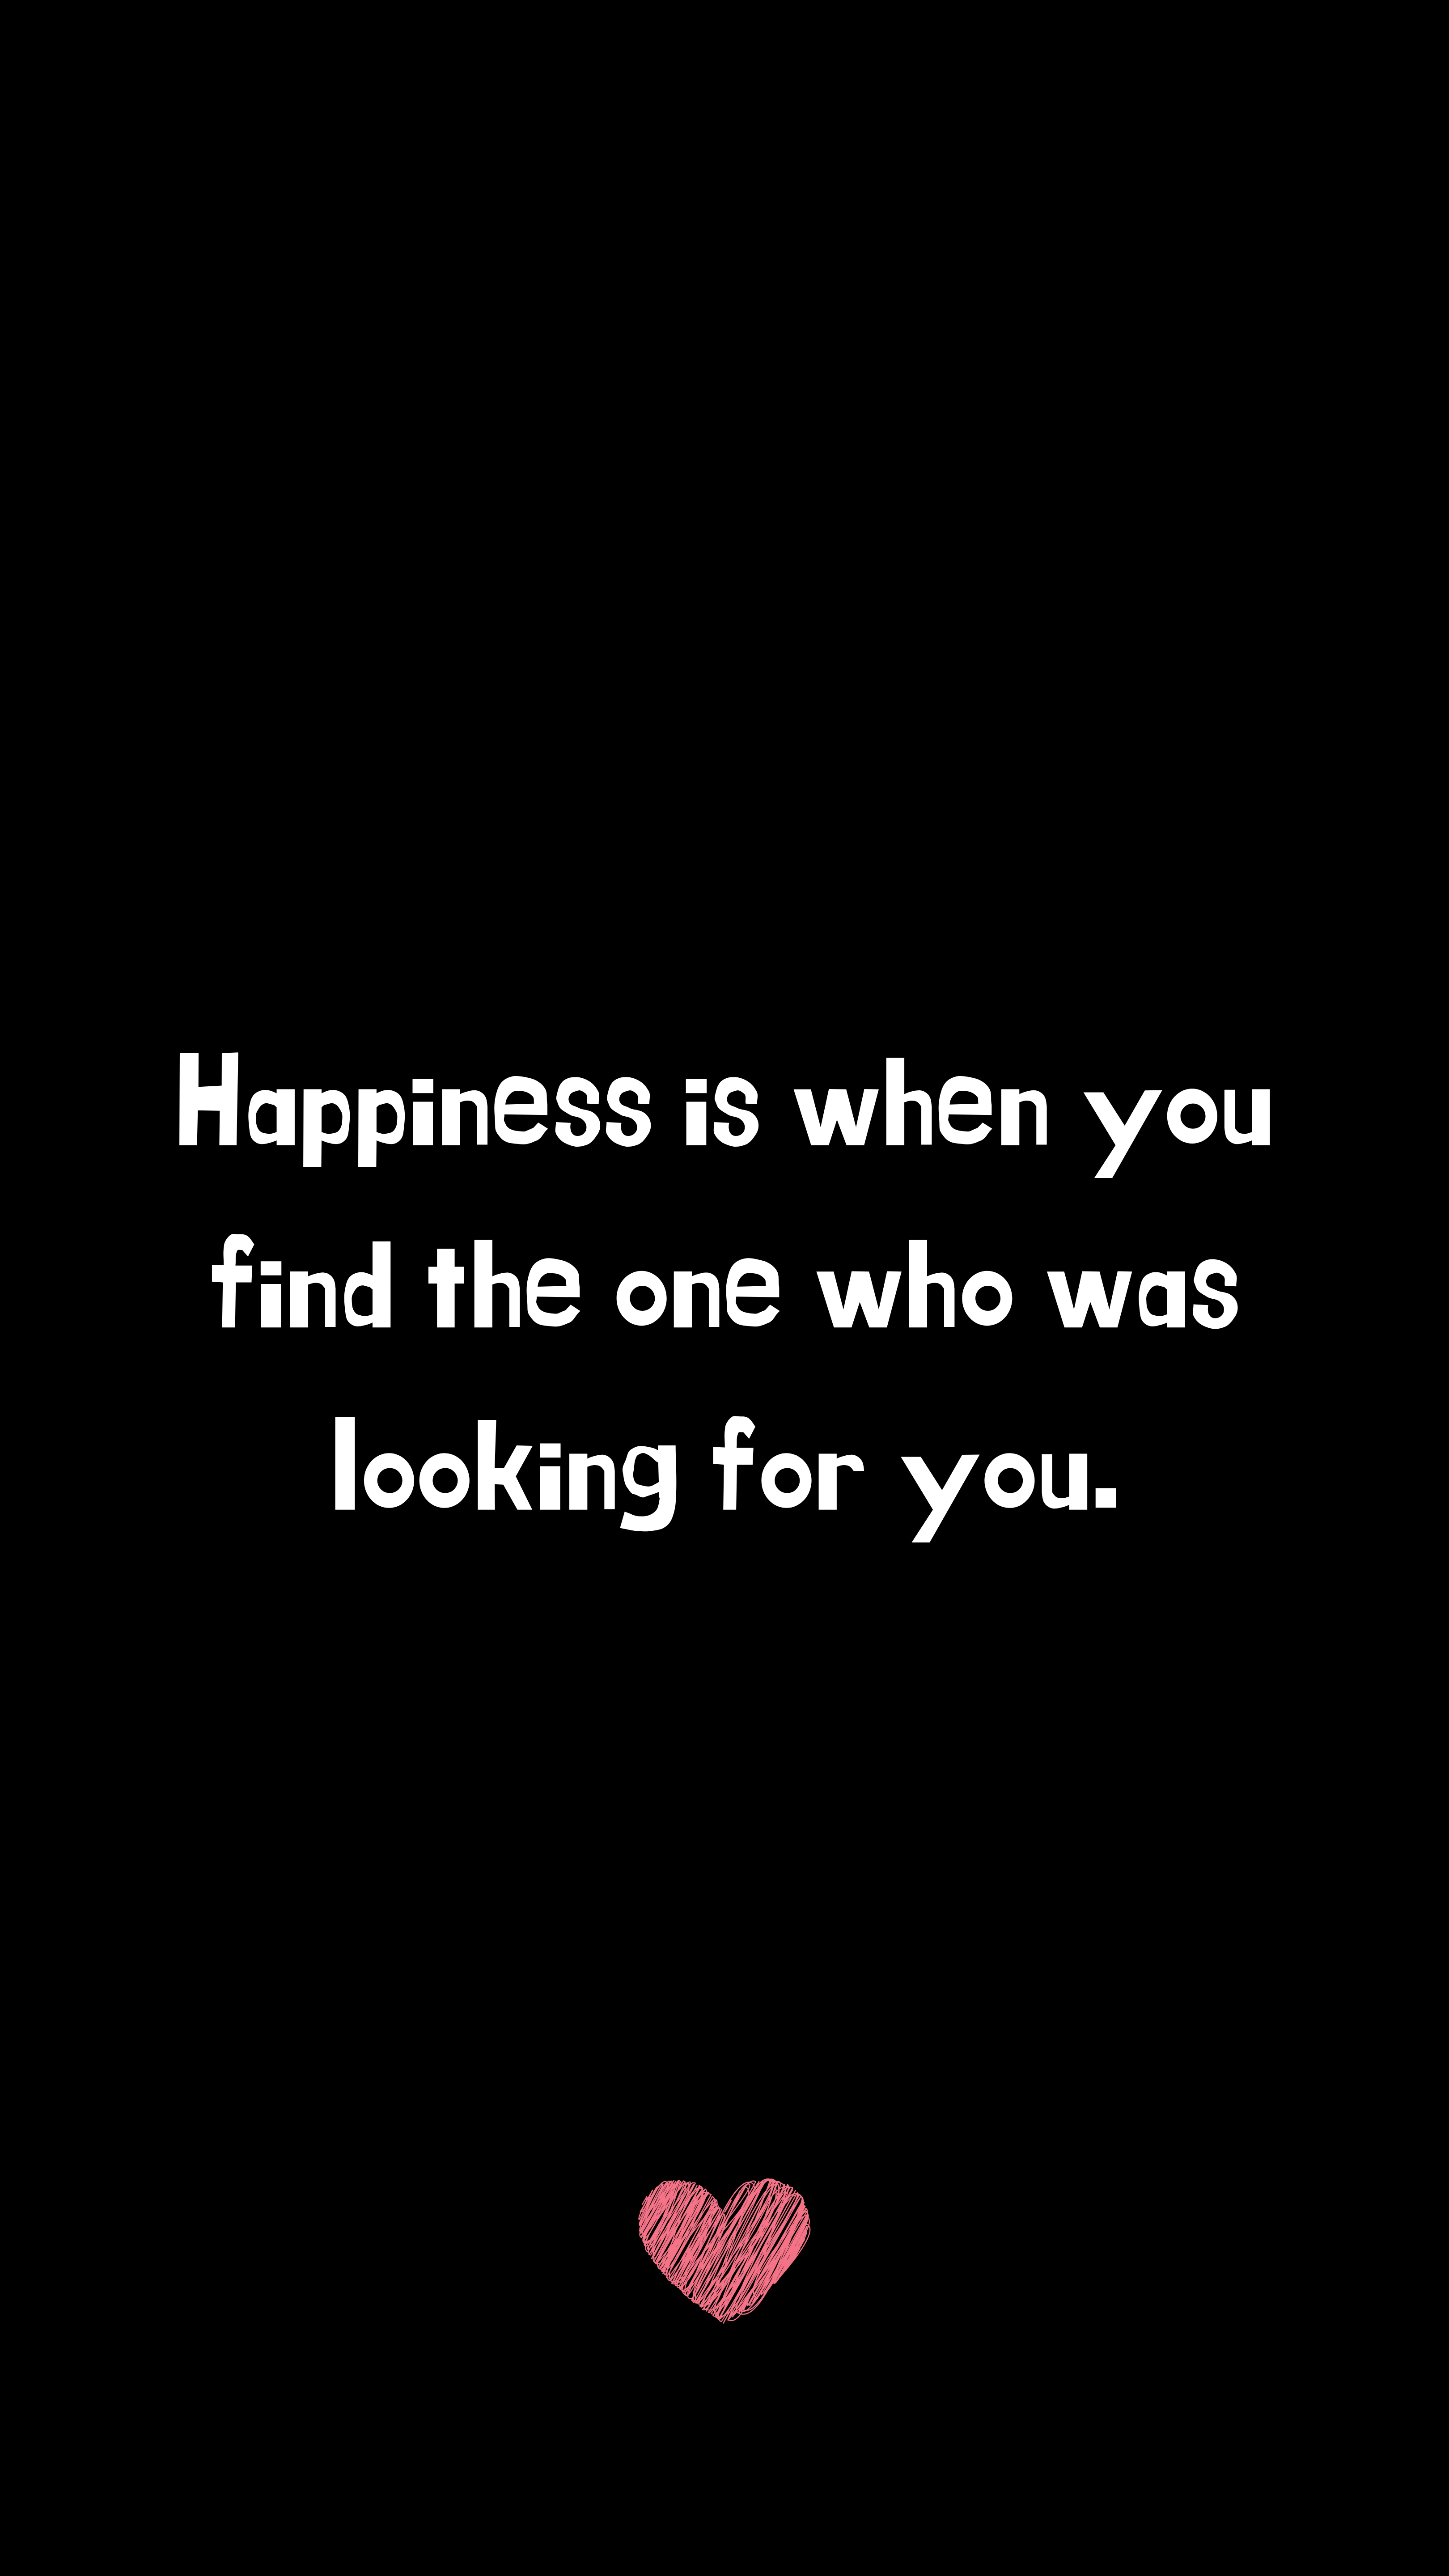 happiness, heart, quotation, words, inscription, quote, search